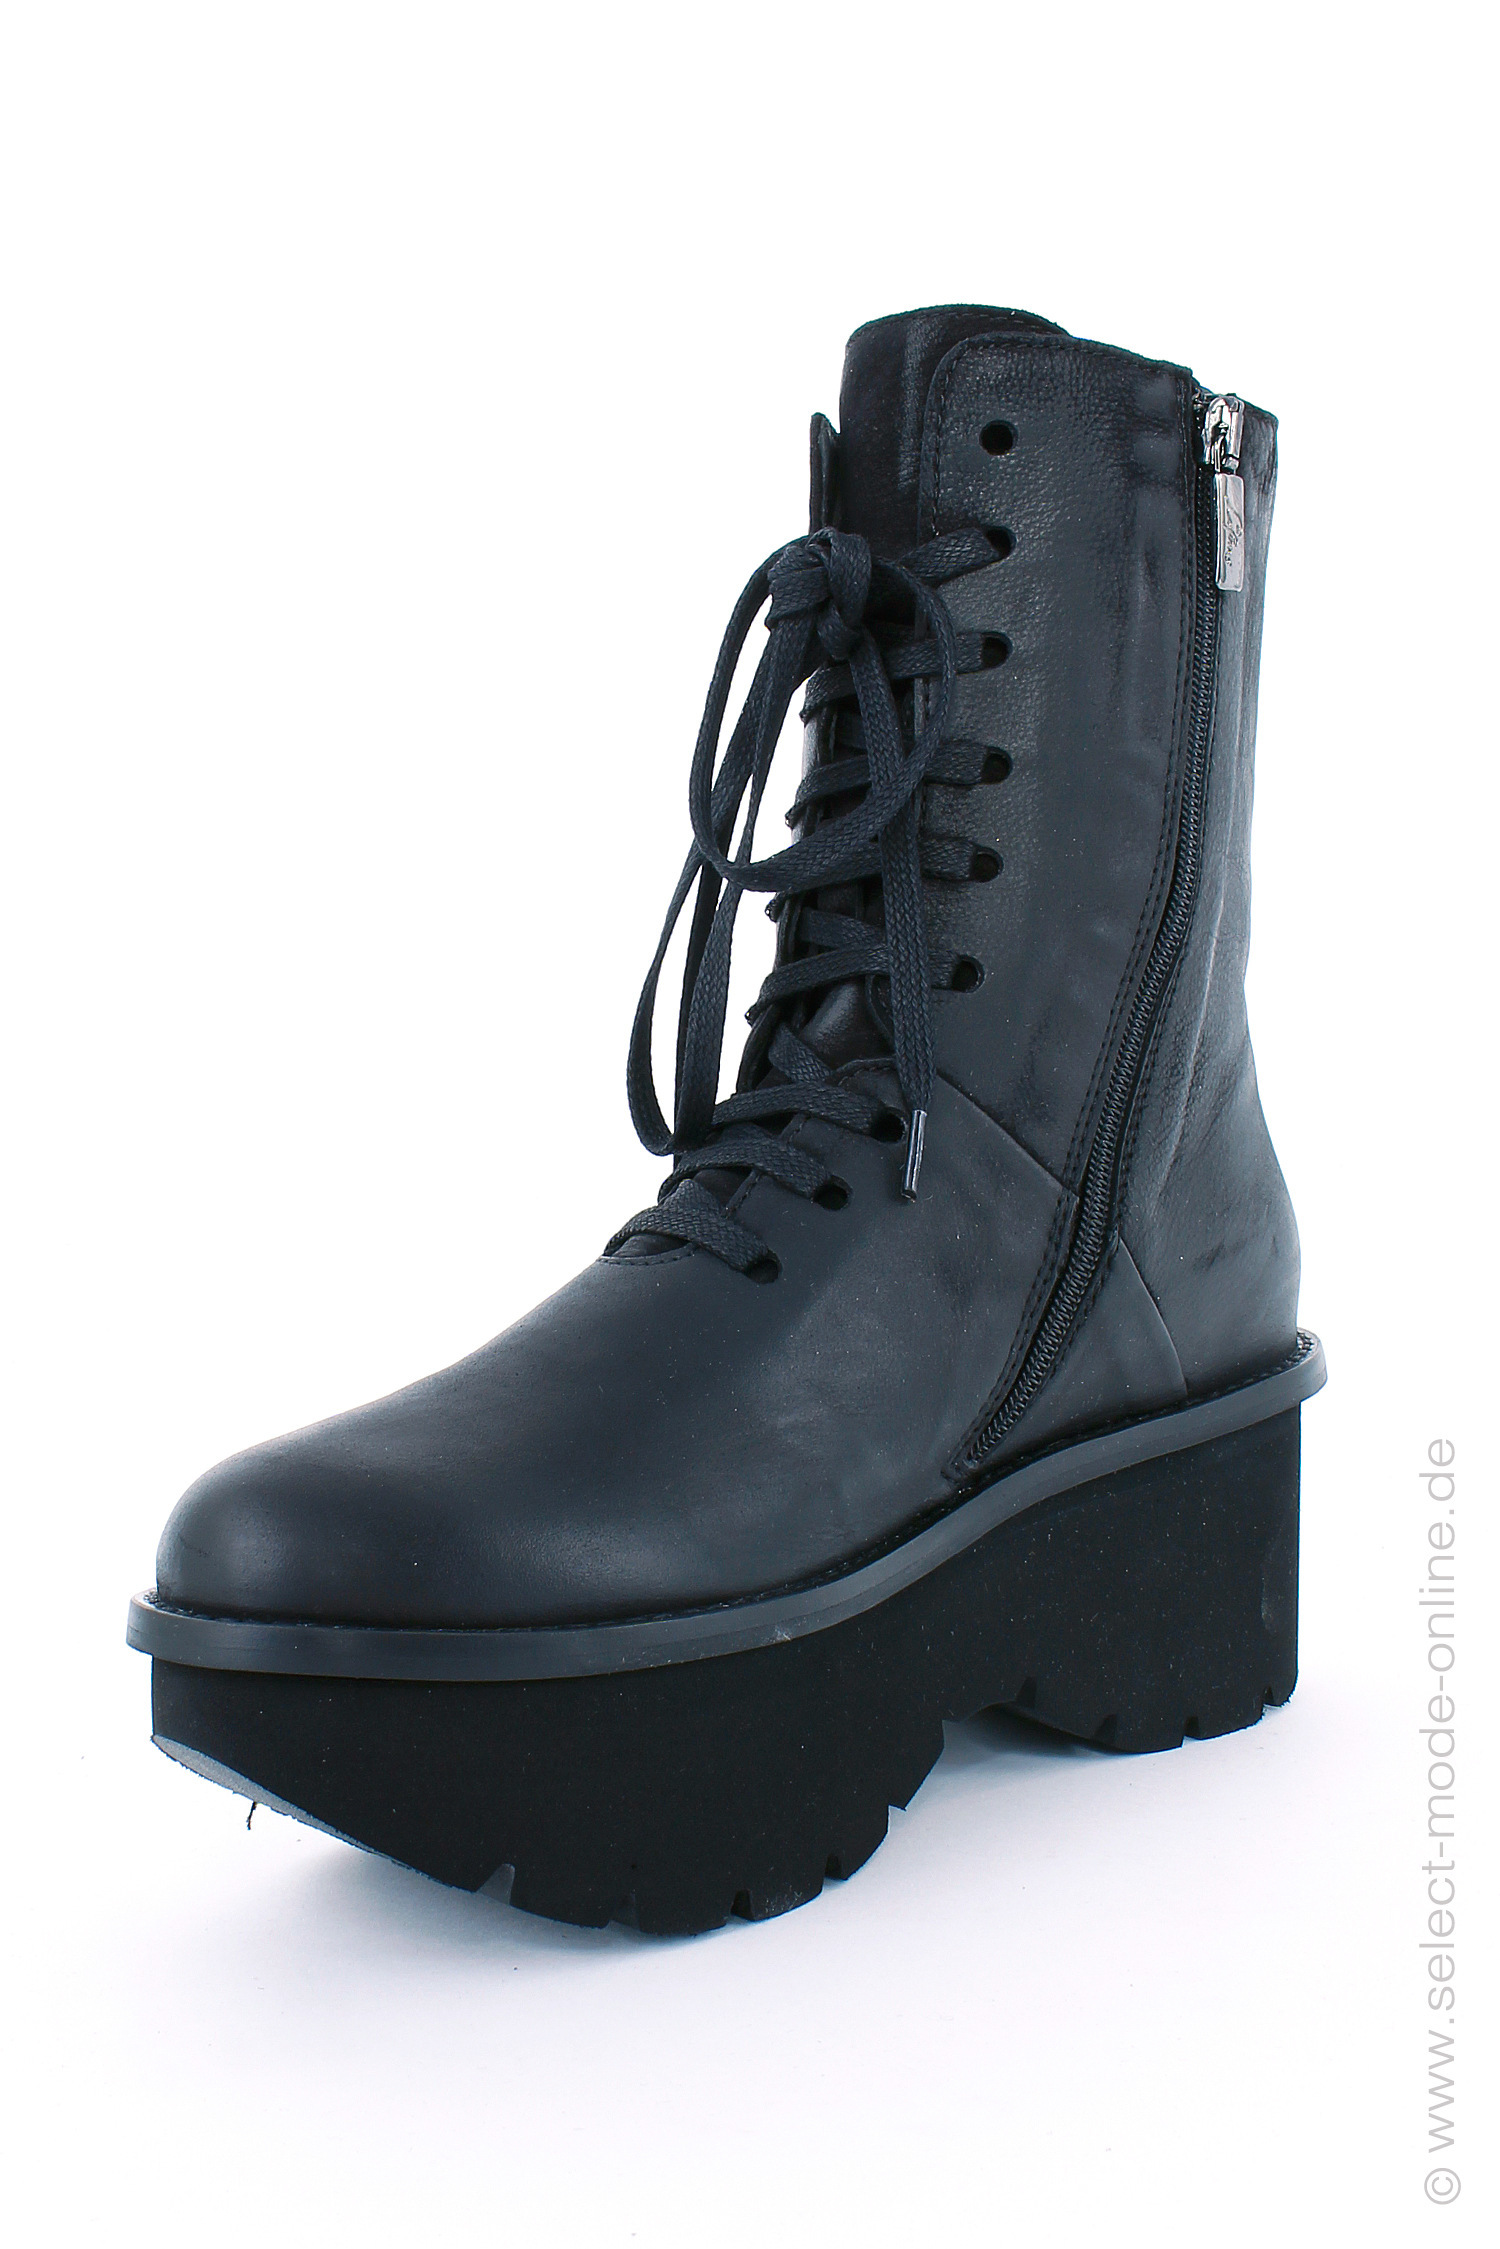 Boots with zipper - black - 1145